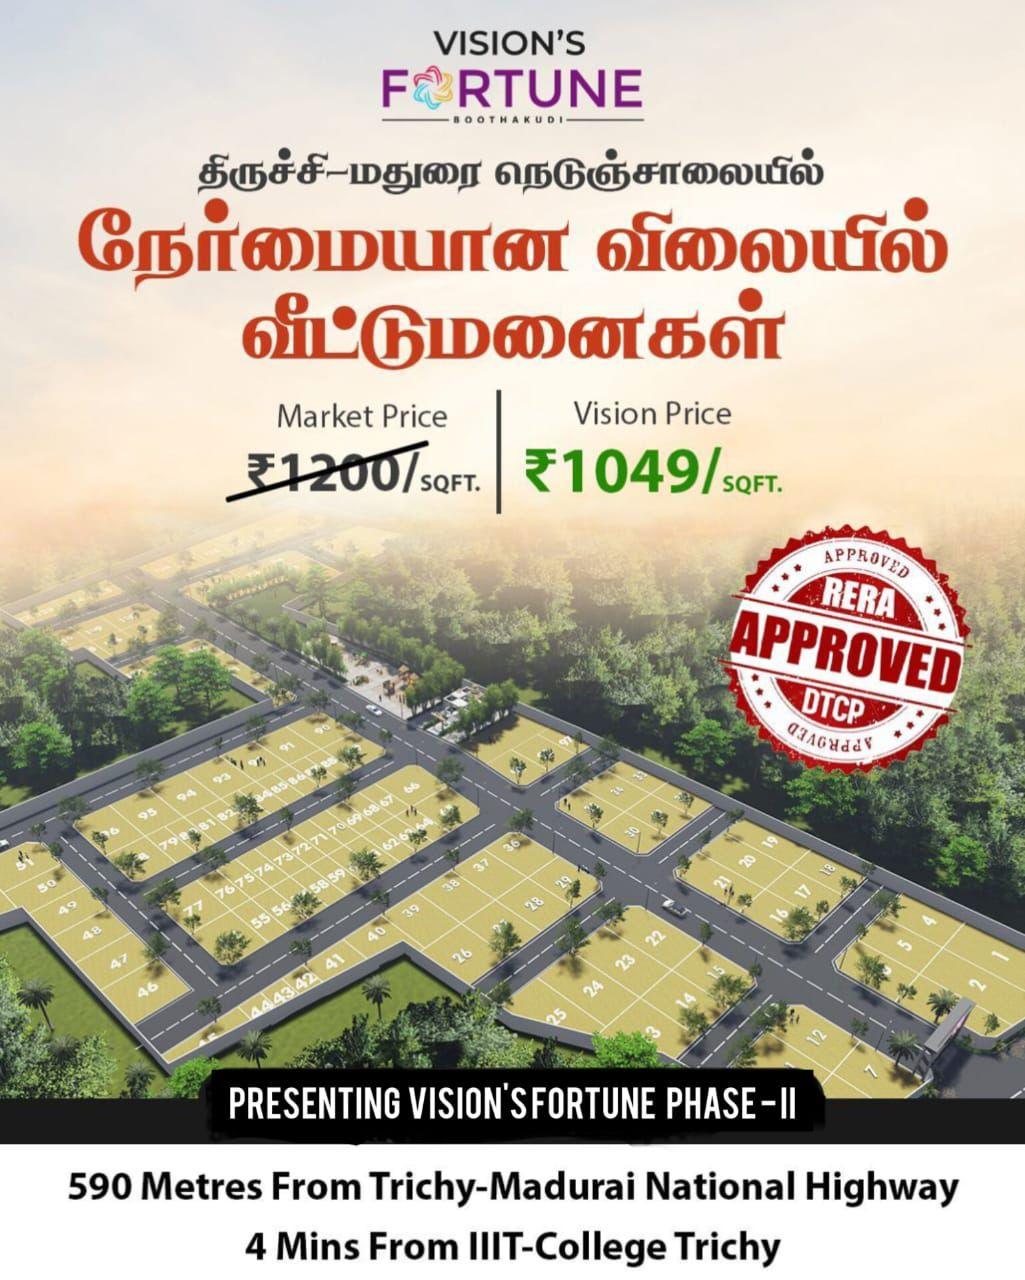 1,200 sq. ft. Sell Land/ Plot for sale @Toll Plaza